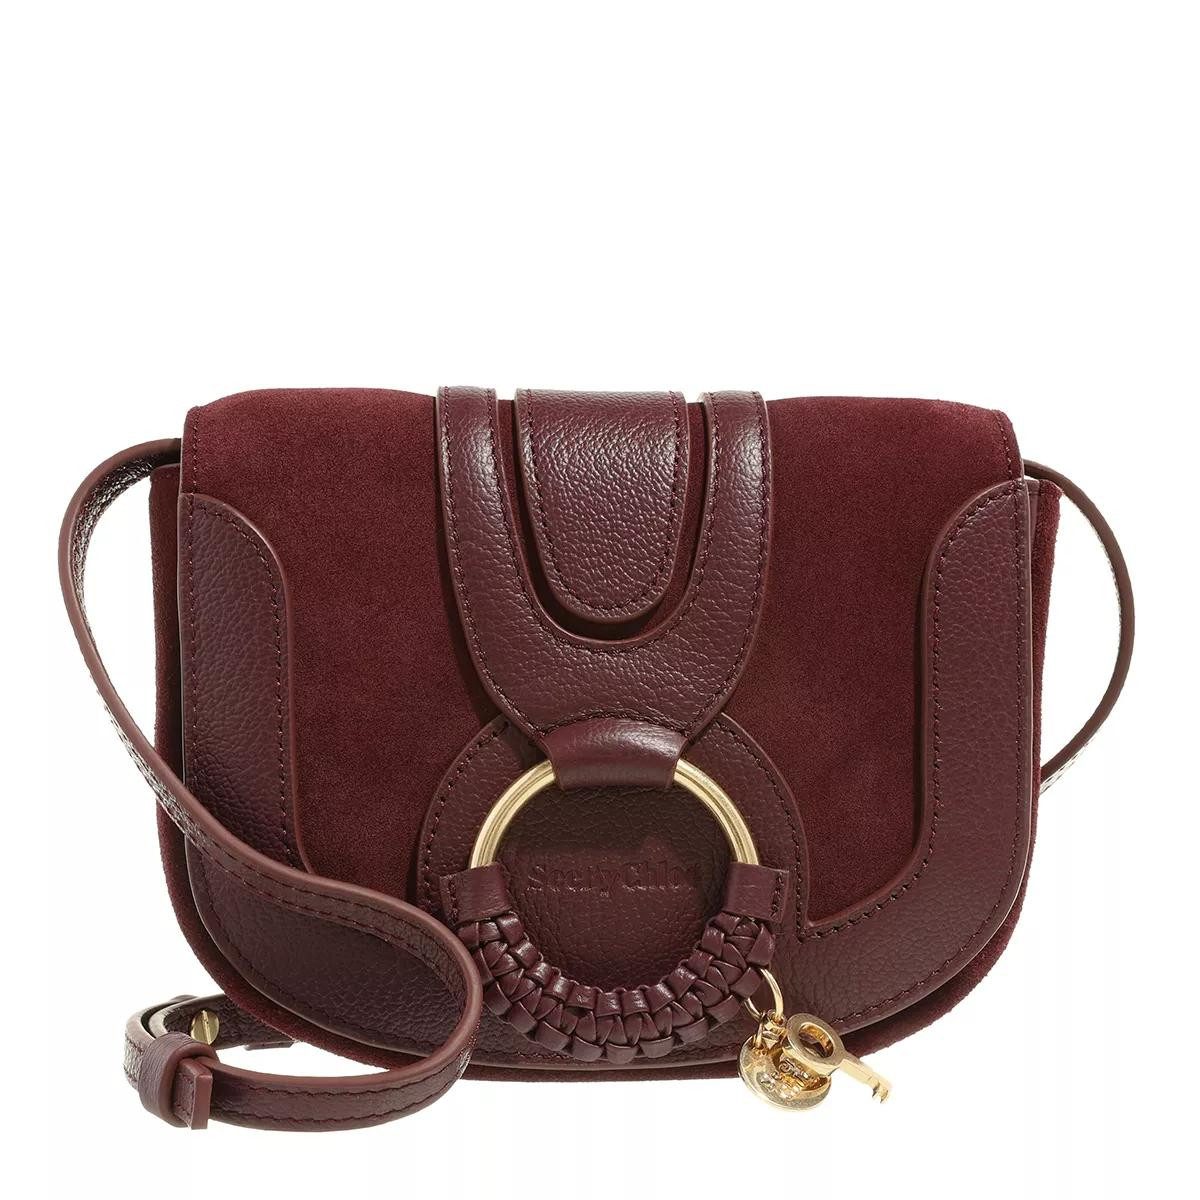 see by chloé Schultertasche brown (1-tlg)